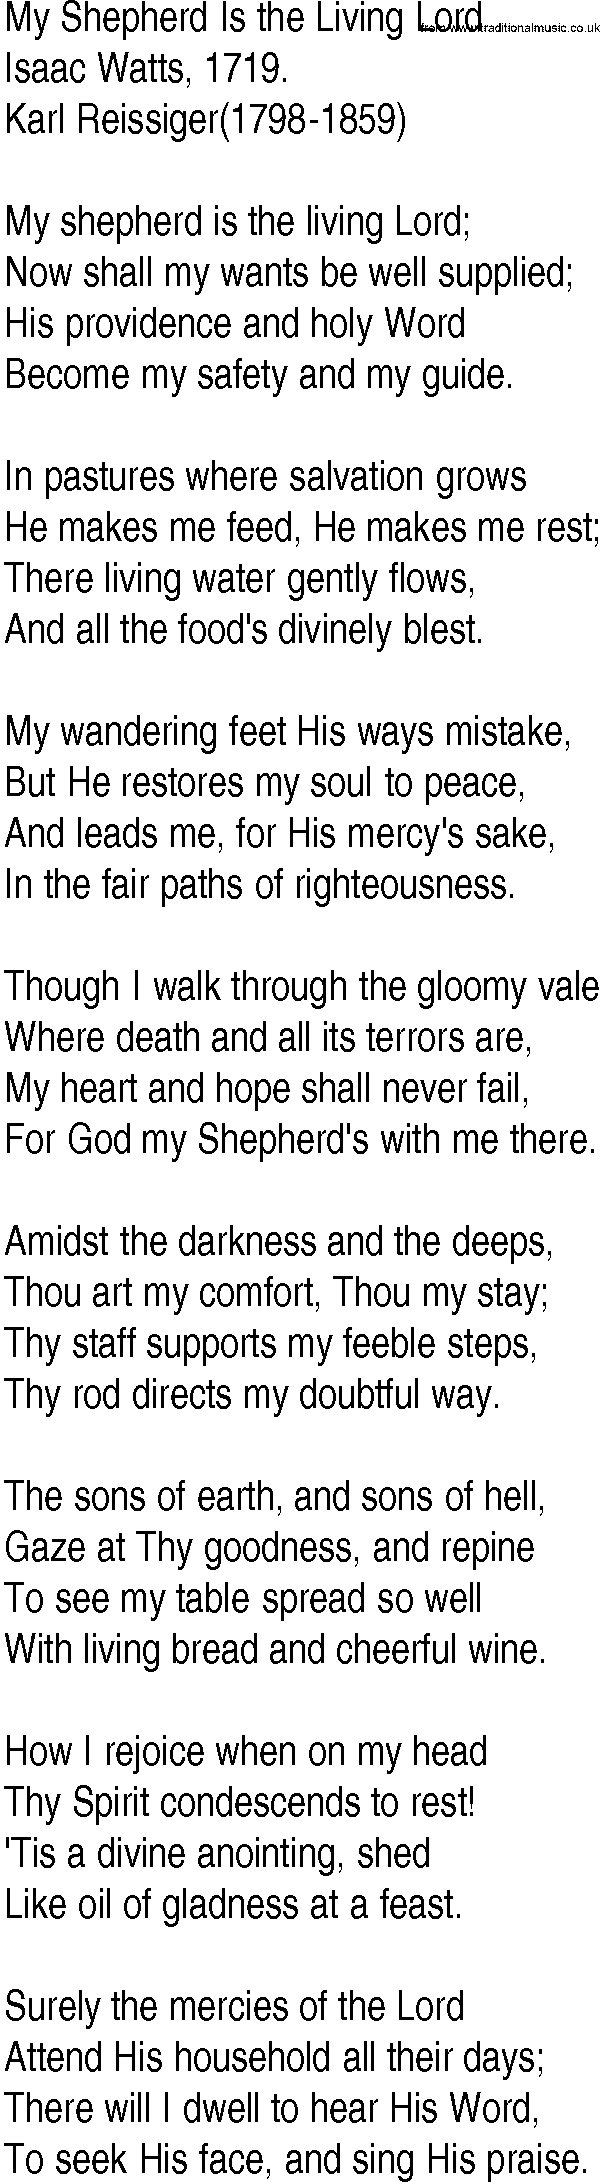 Hymn and Gospel Song: My Shepherd Is the Living Lord by Isaac Watts lyrics